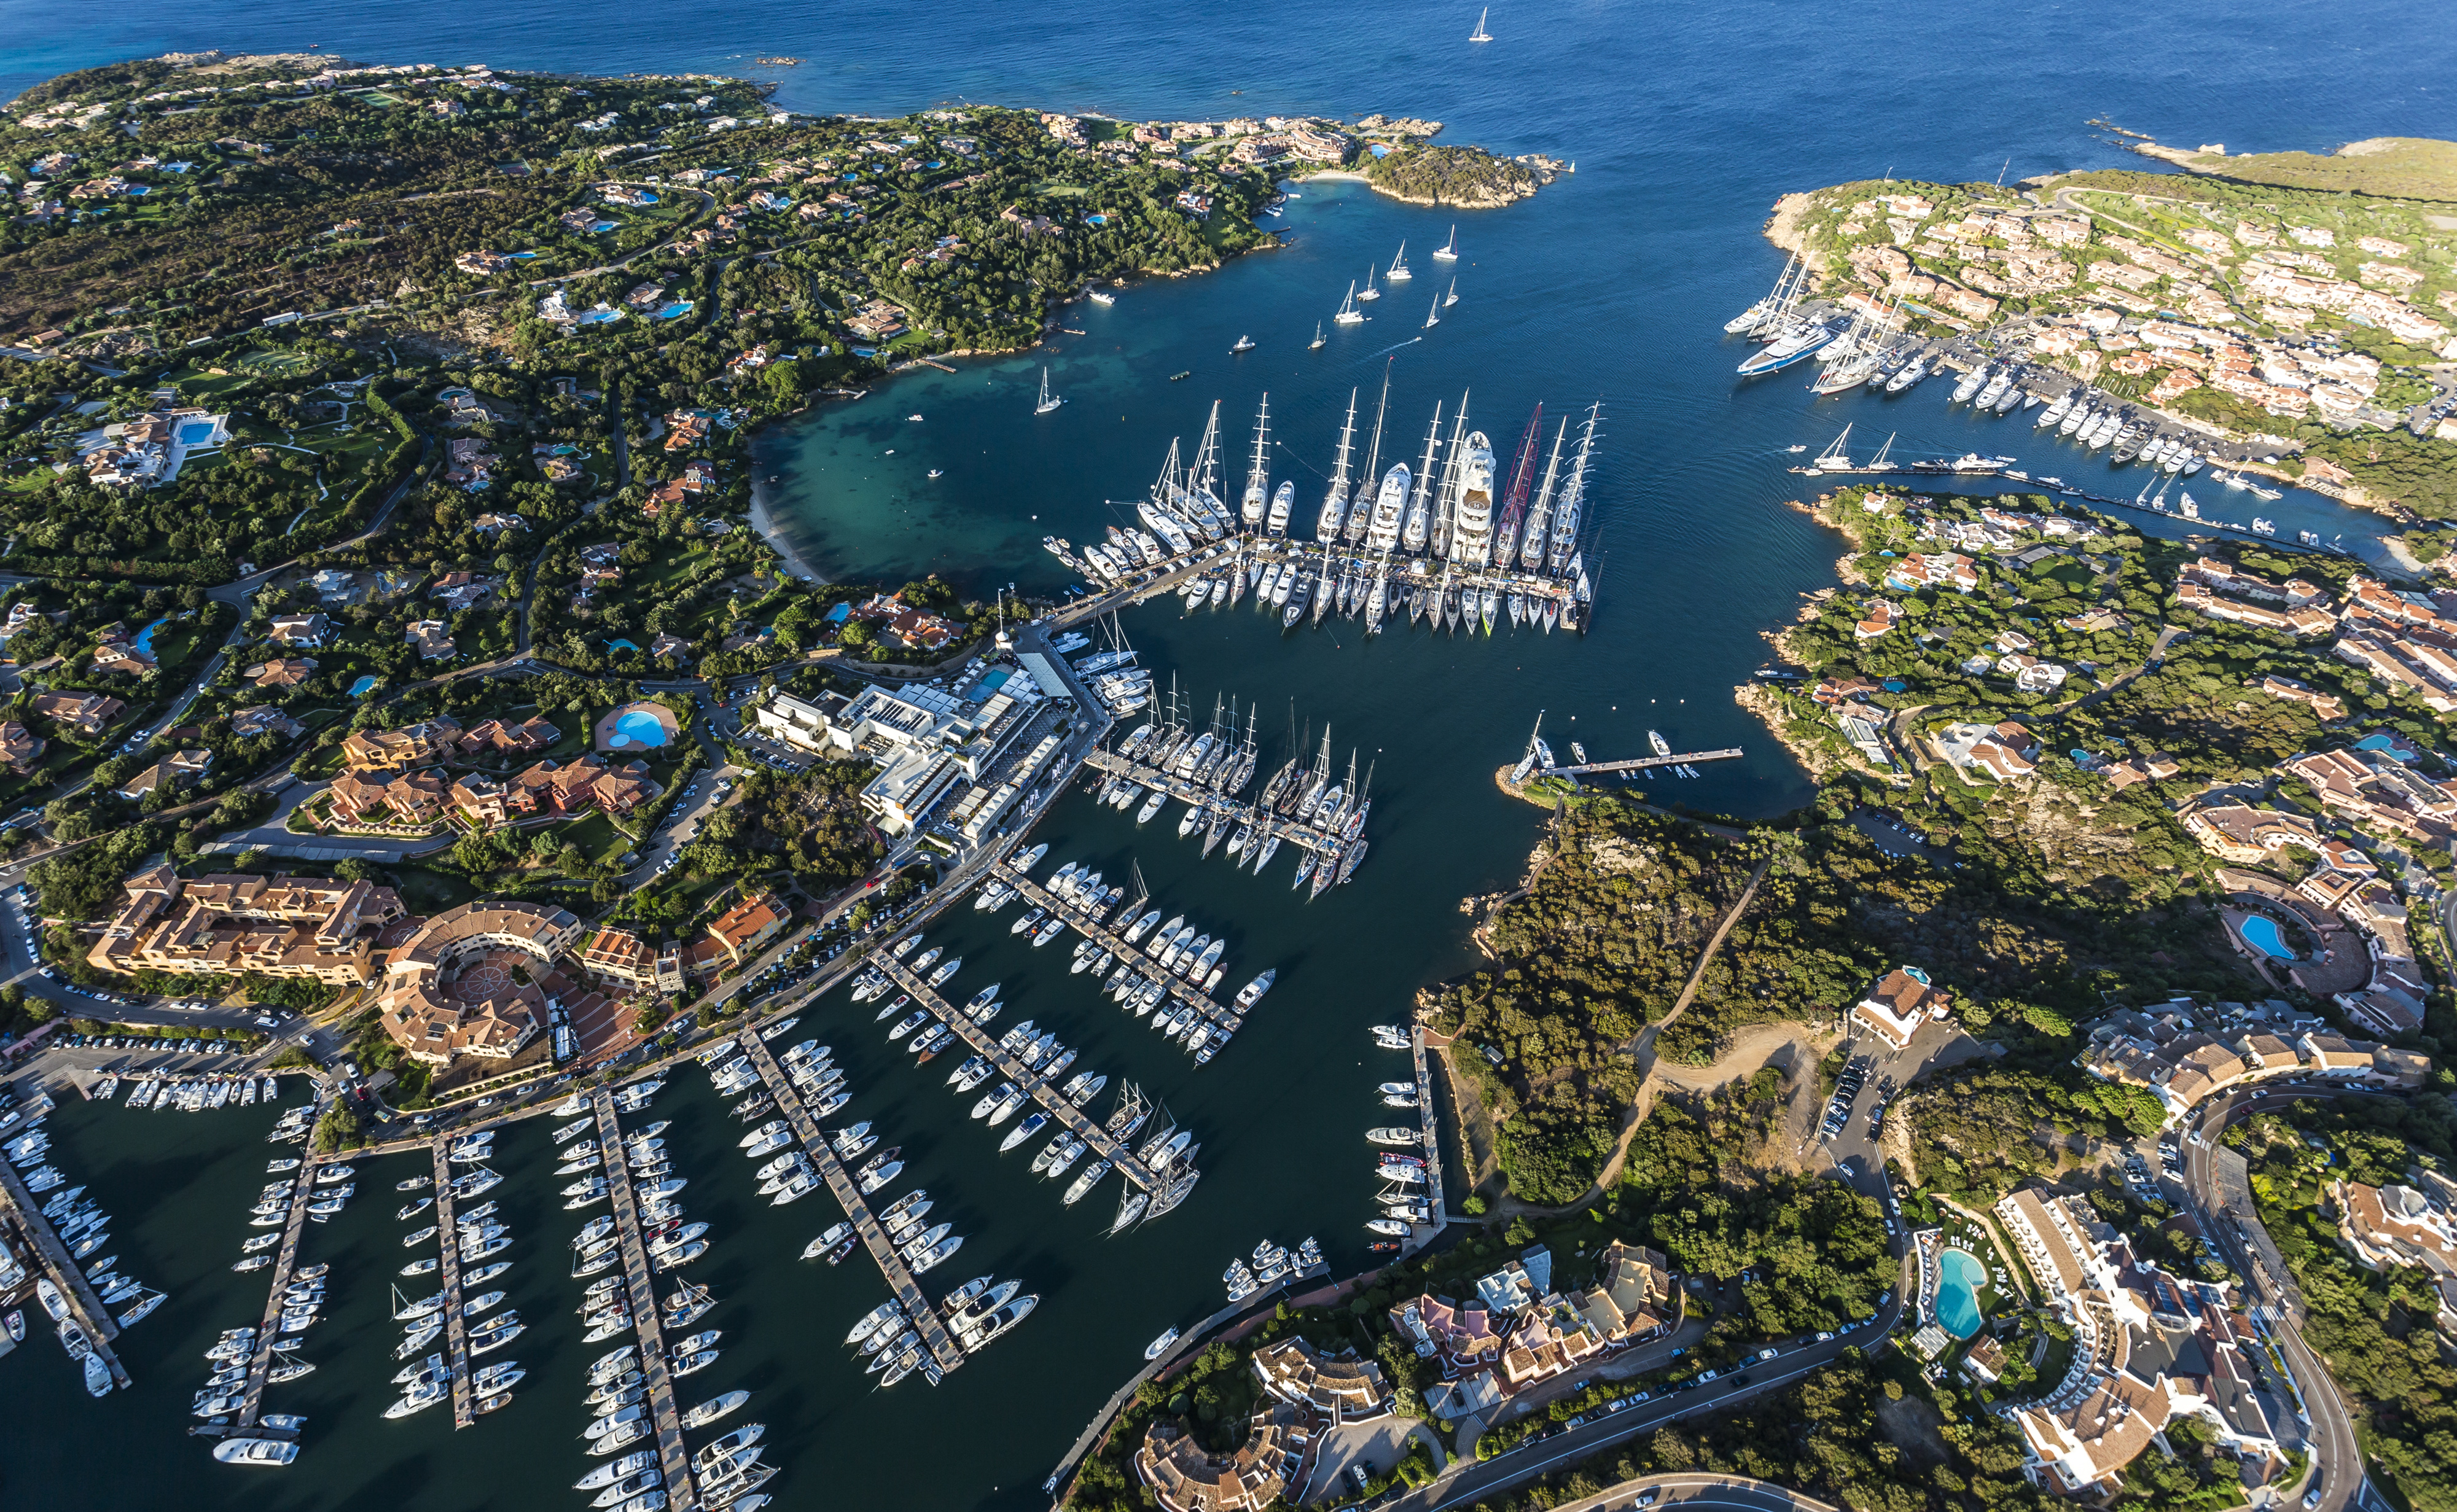 Maxi-Yacht-Rolex-Cup - Dockside Ambiance In Porto Cervo